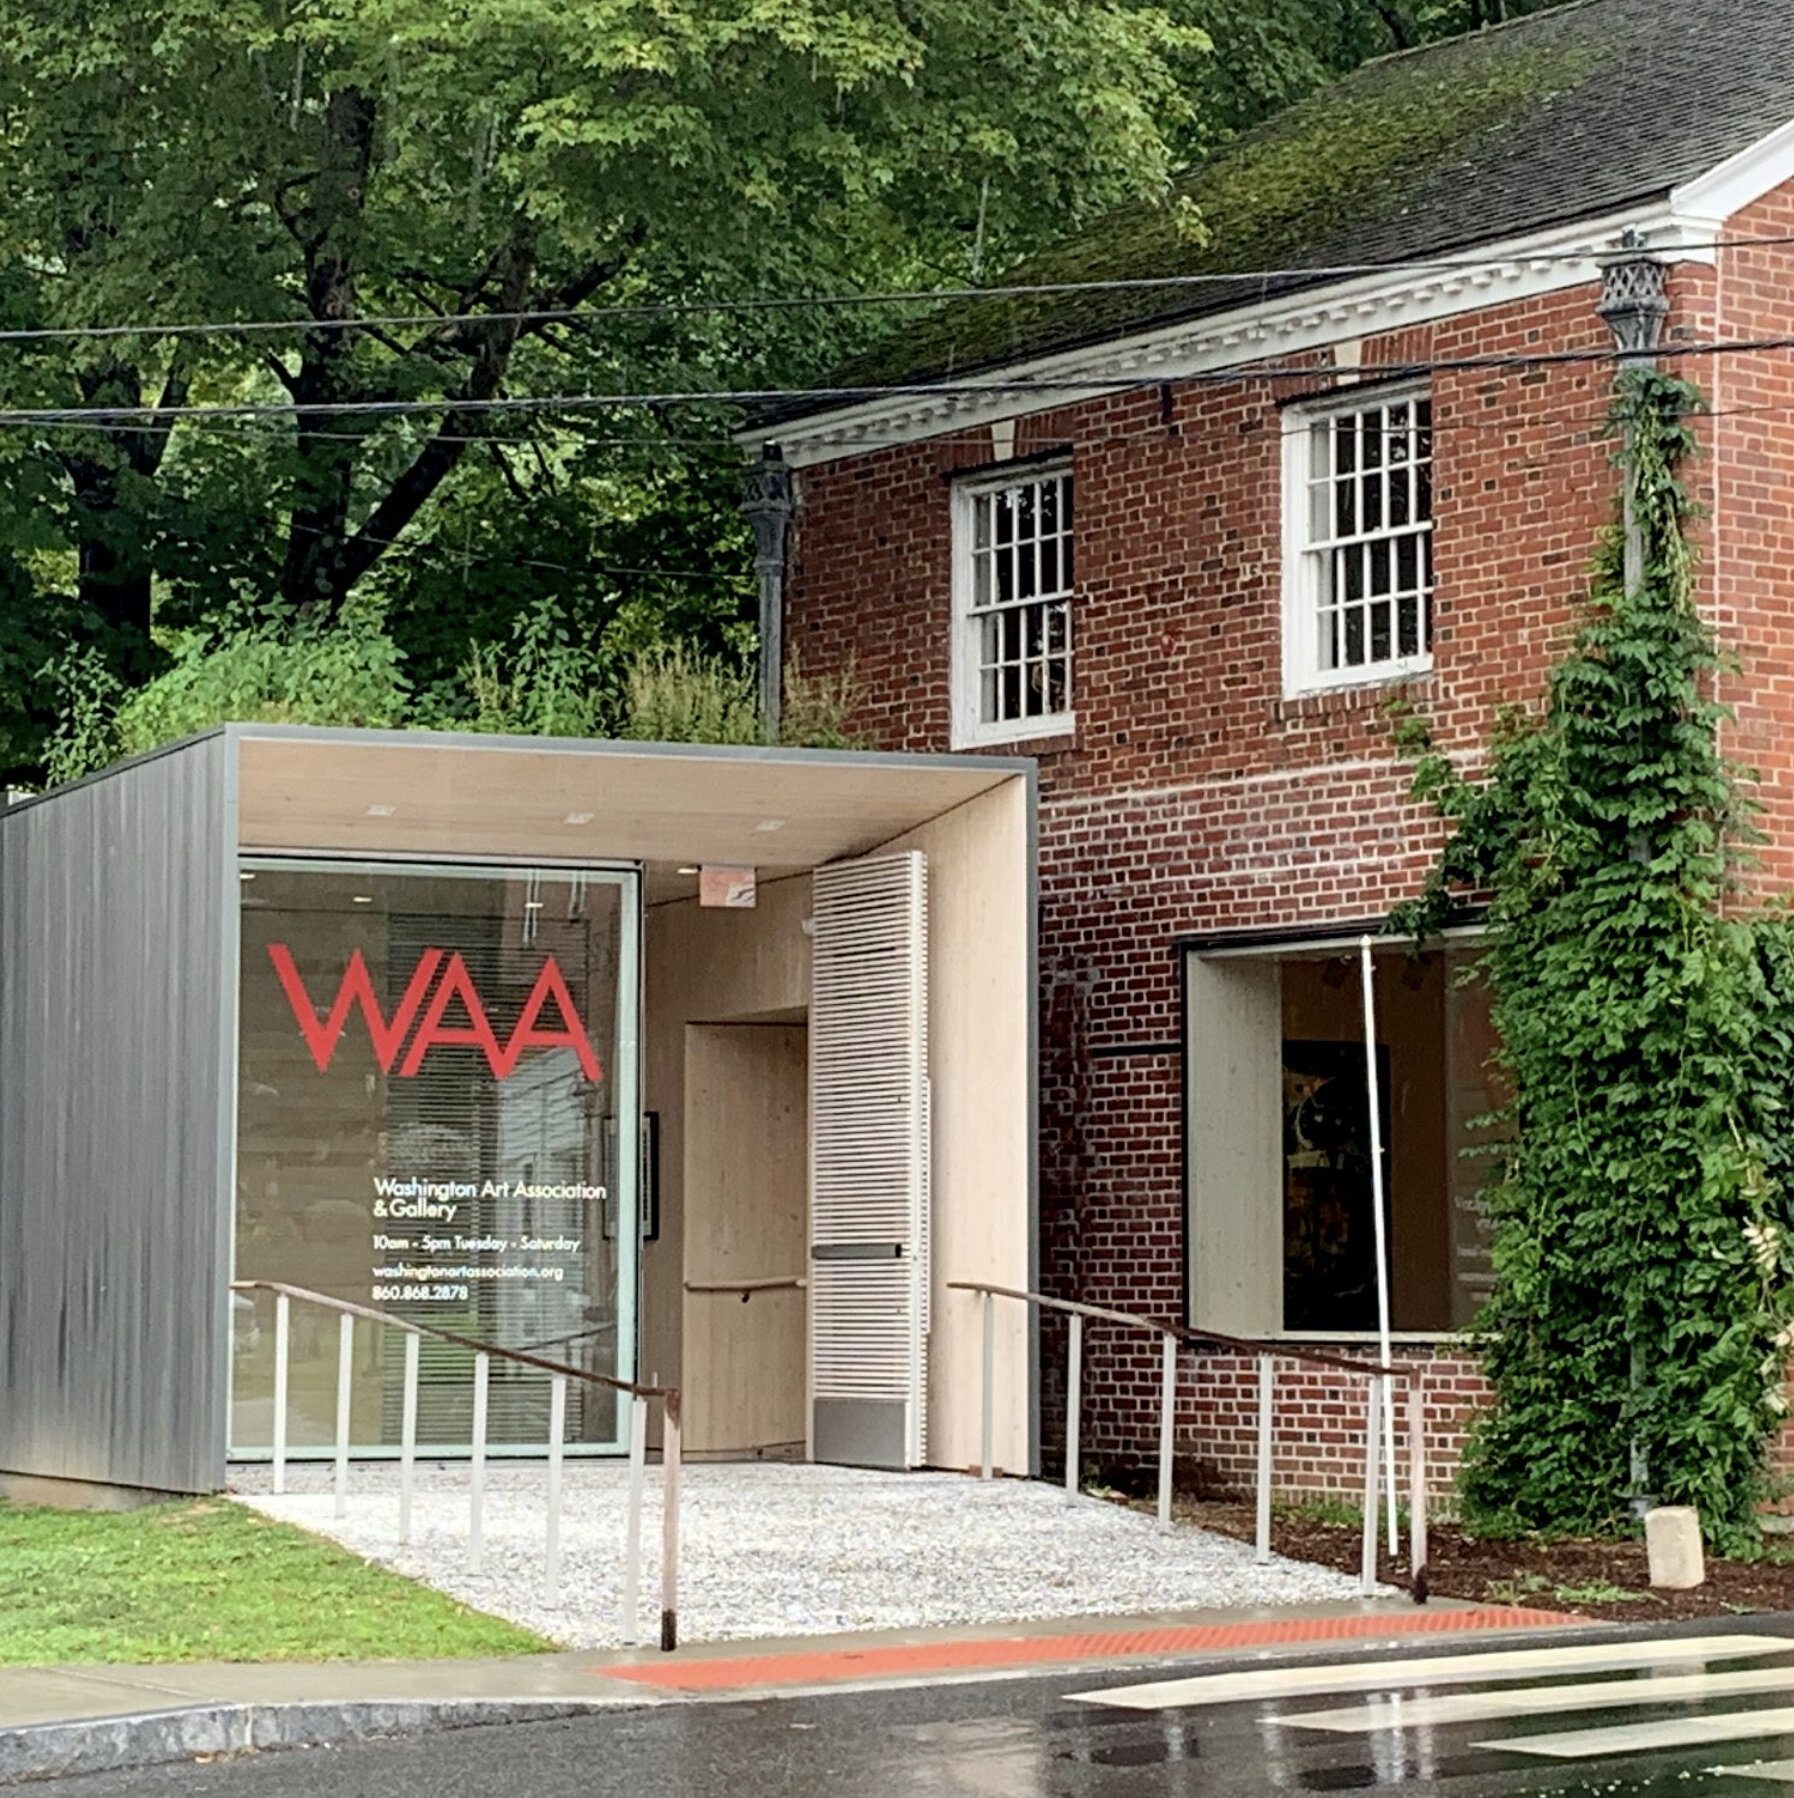 WAA's new entry, designed by Gray Organschi Architecture, 2018.